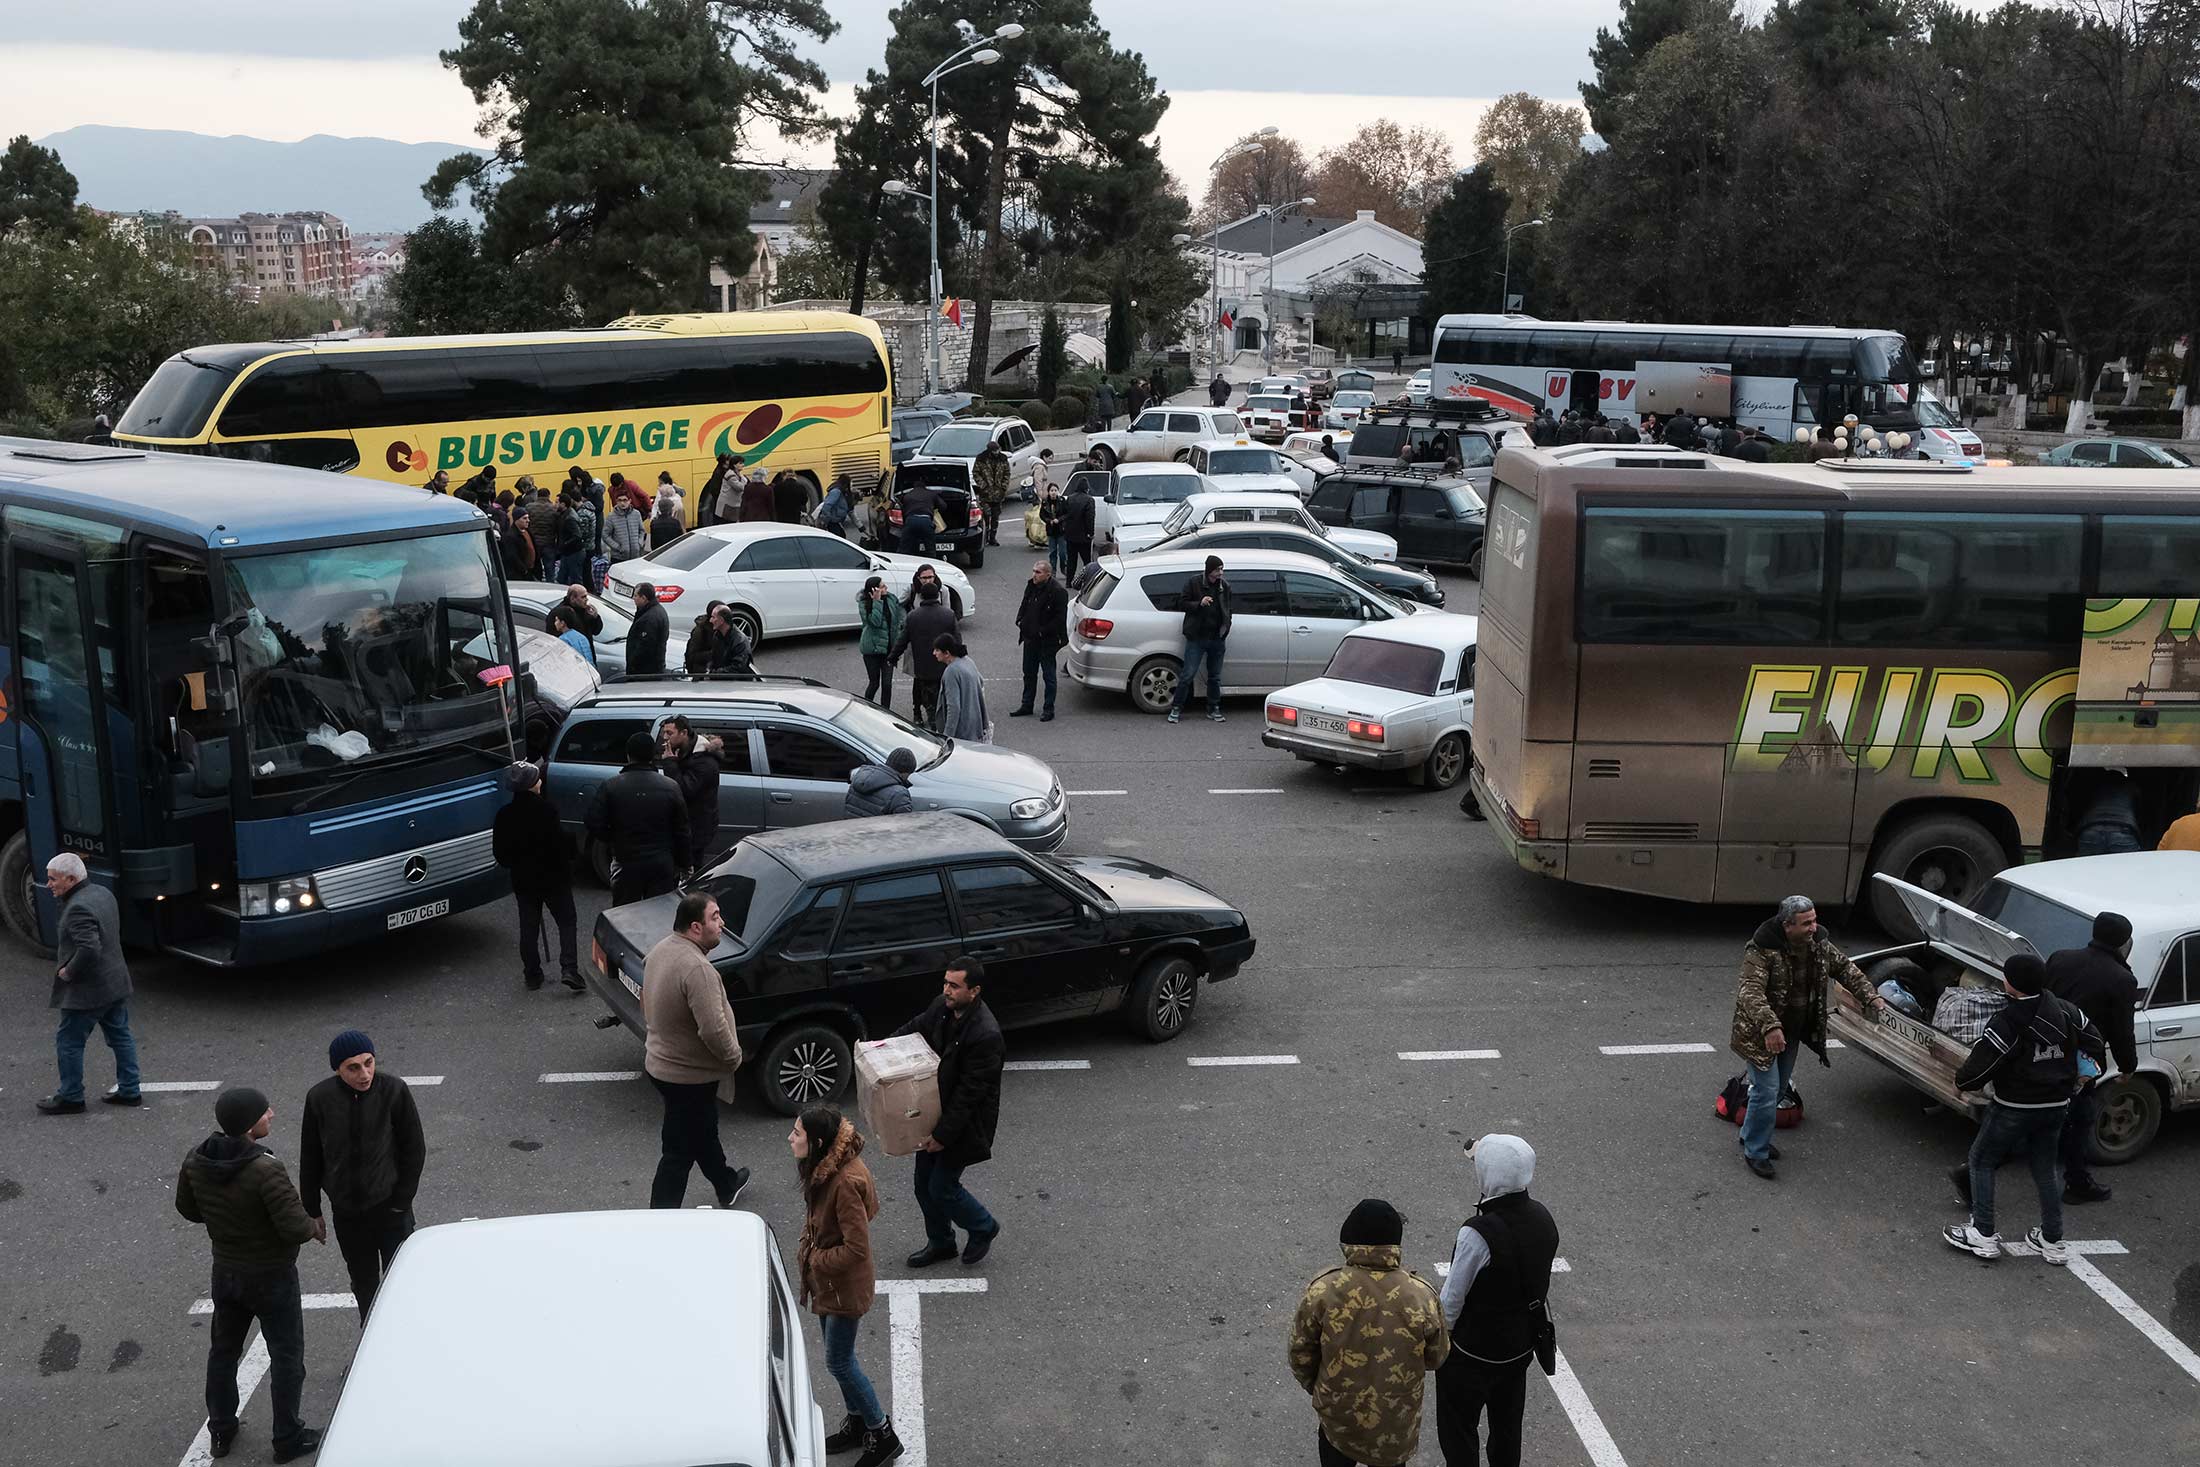 Dozens of busses carrying returning refugees arrive in Stepanakert every day. Reportedly, 13,000 peo ...